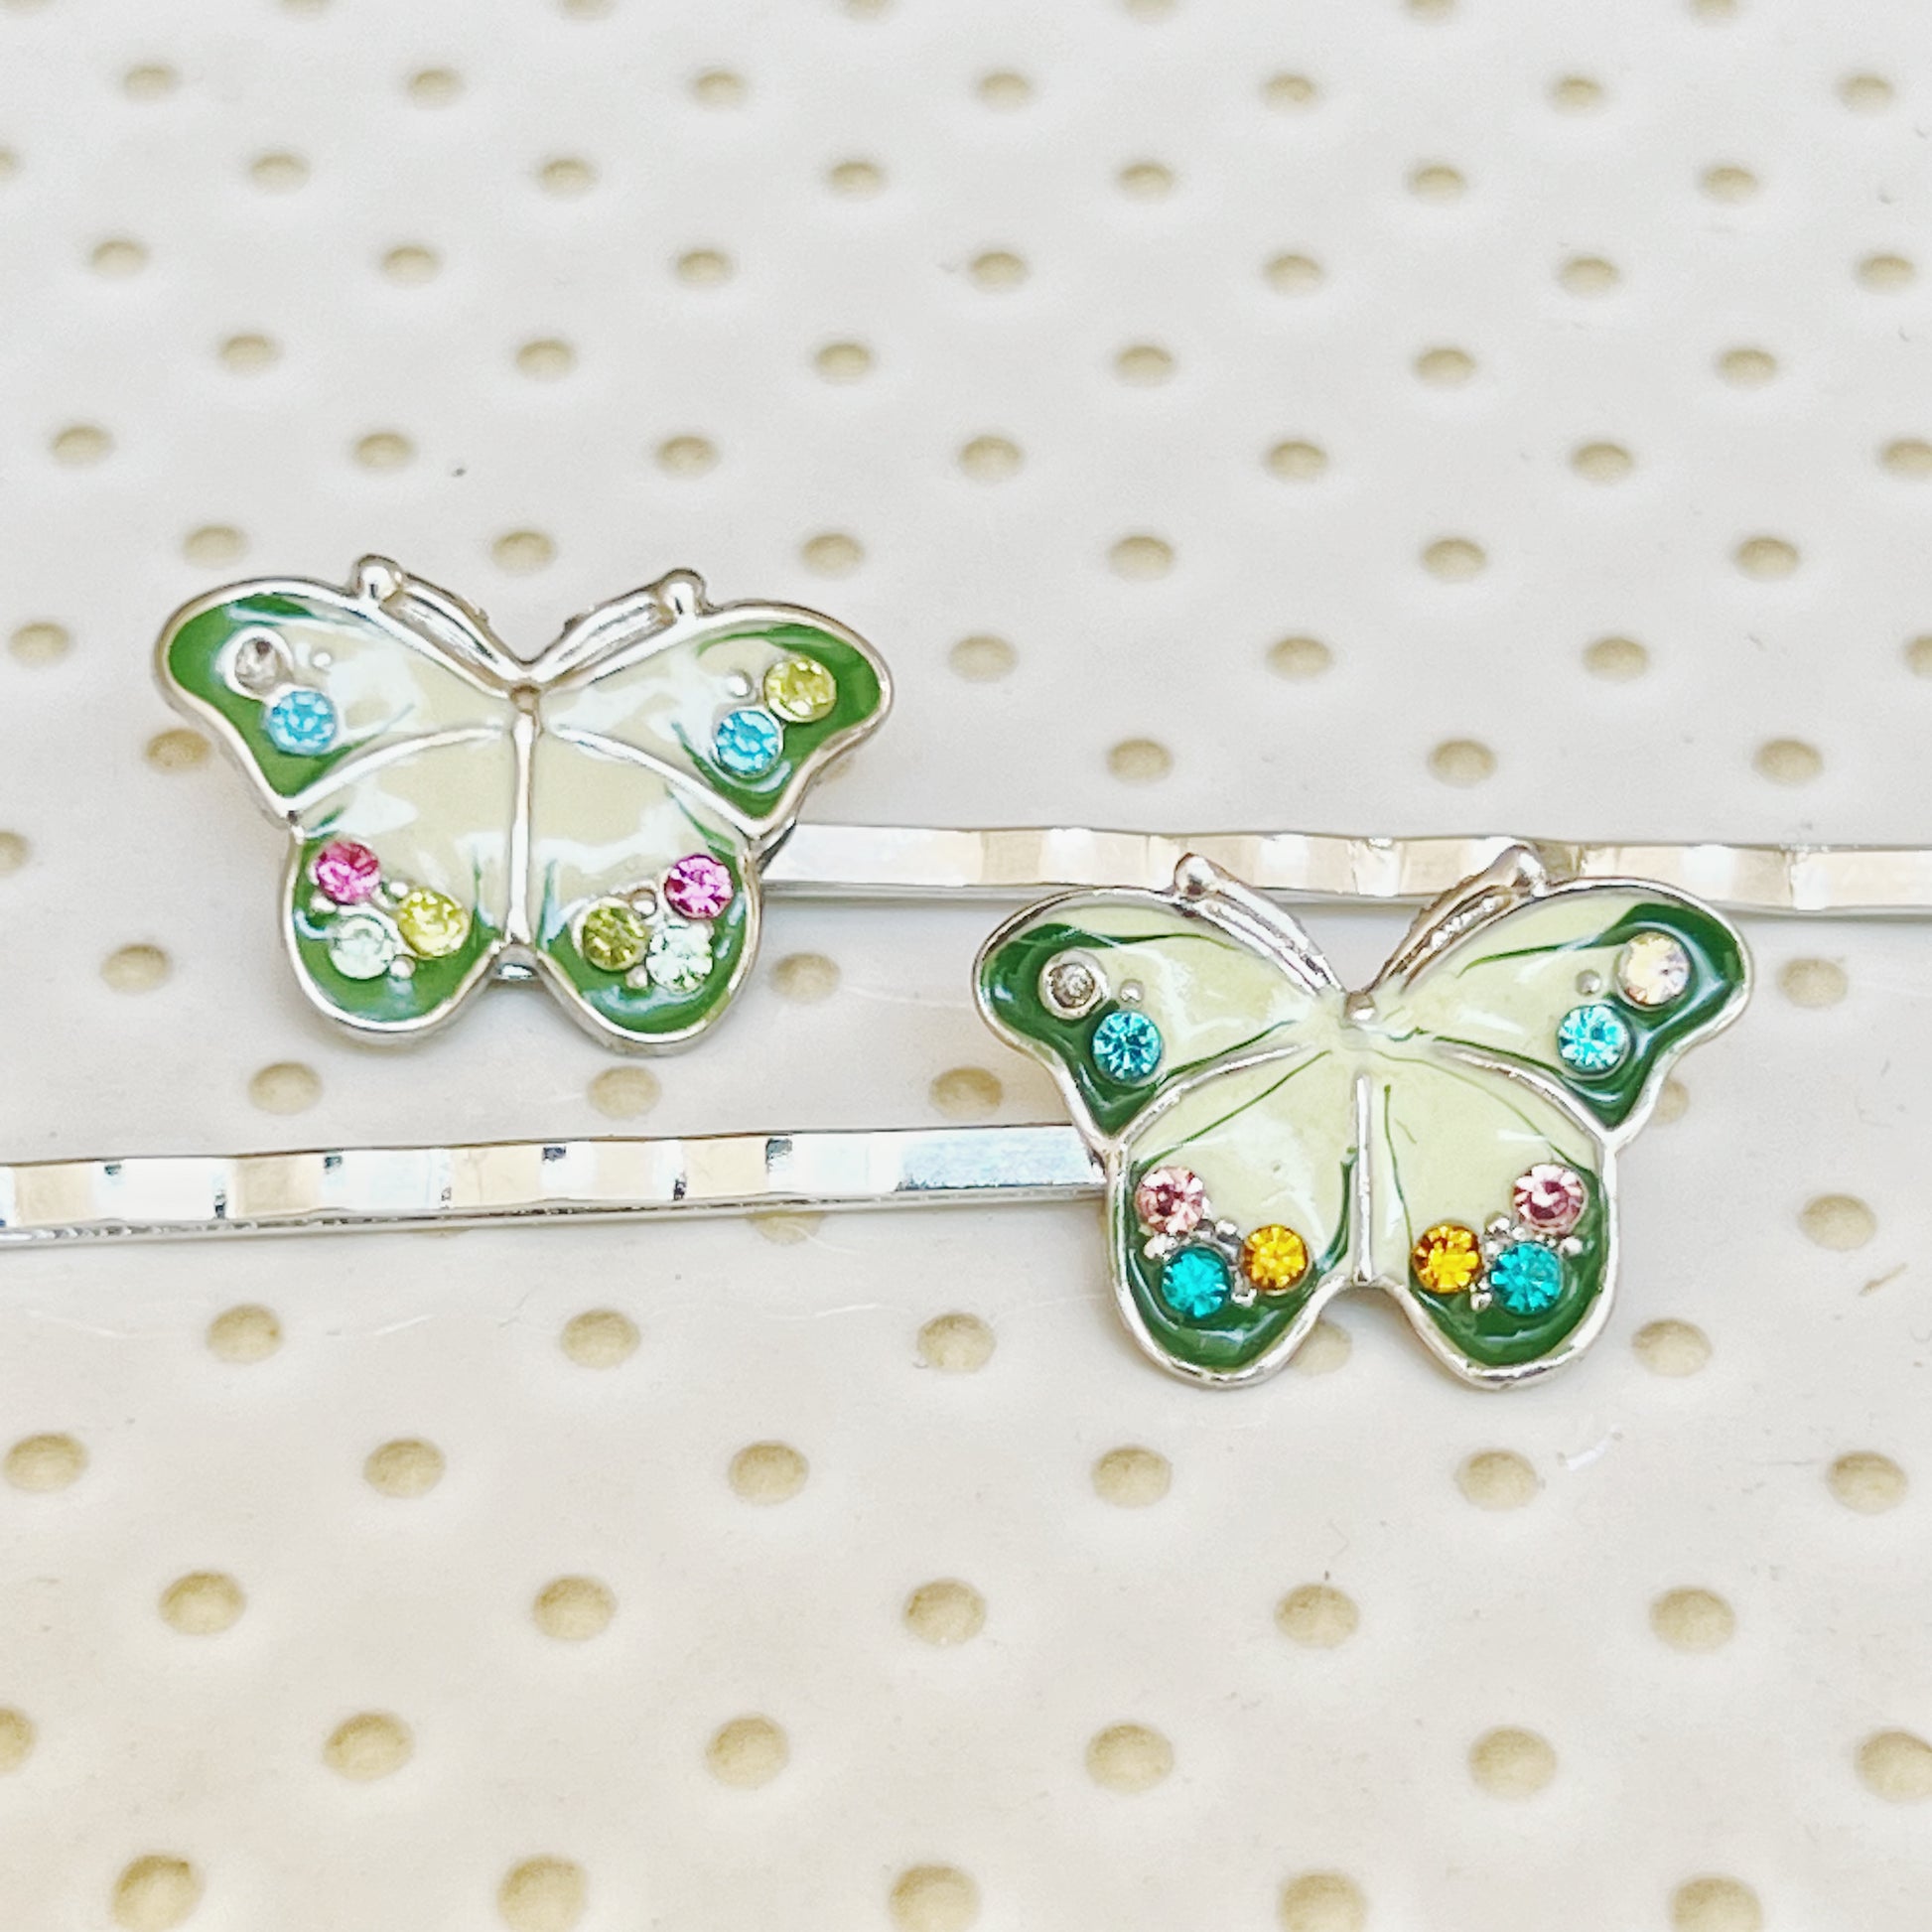 Women’s Green Butterfly Hair Pins - Stunning Multi-Colored Rhinestone Accents for Glamorous Hairstyles